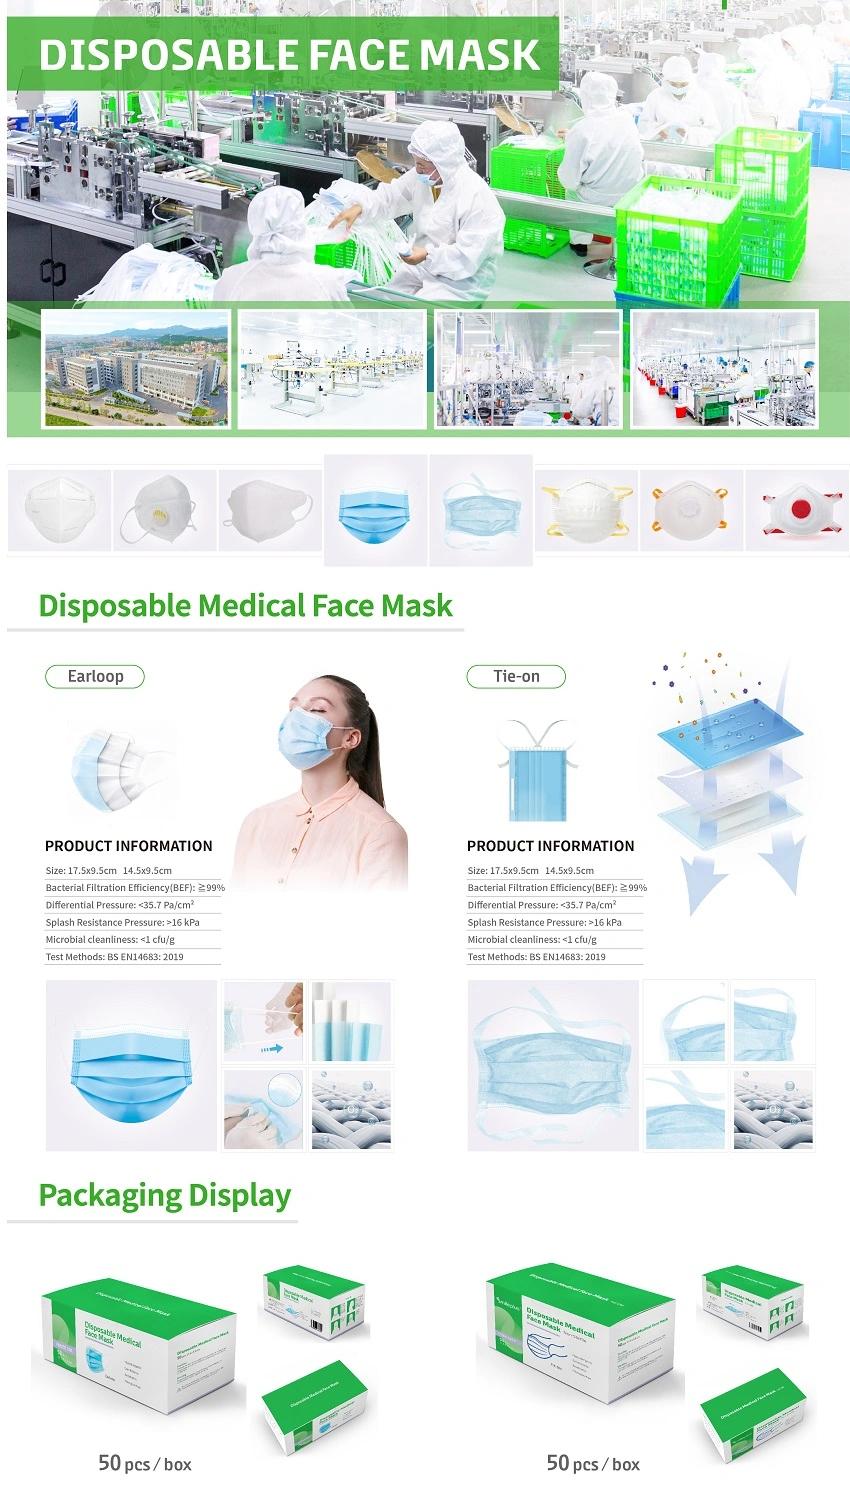 Hot Sale Protection Face Mask, High Filtration and Ventilation Security with Valve